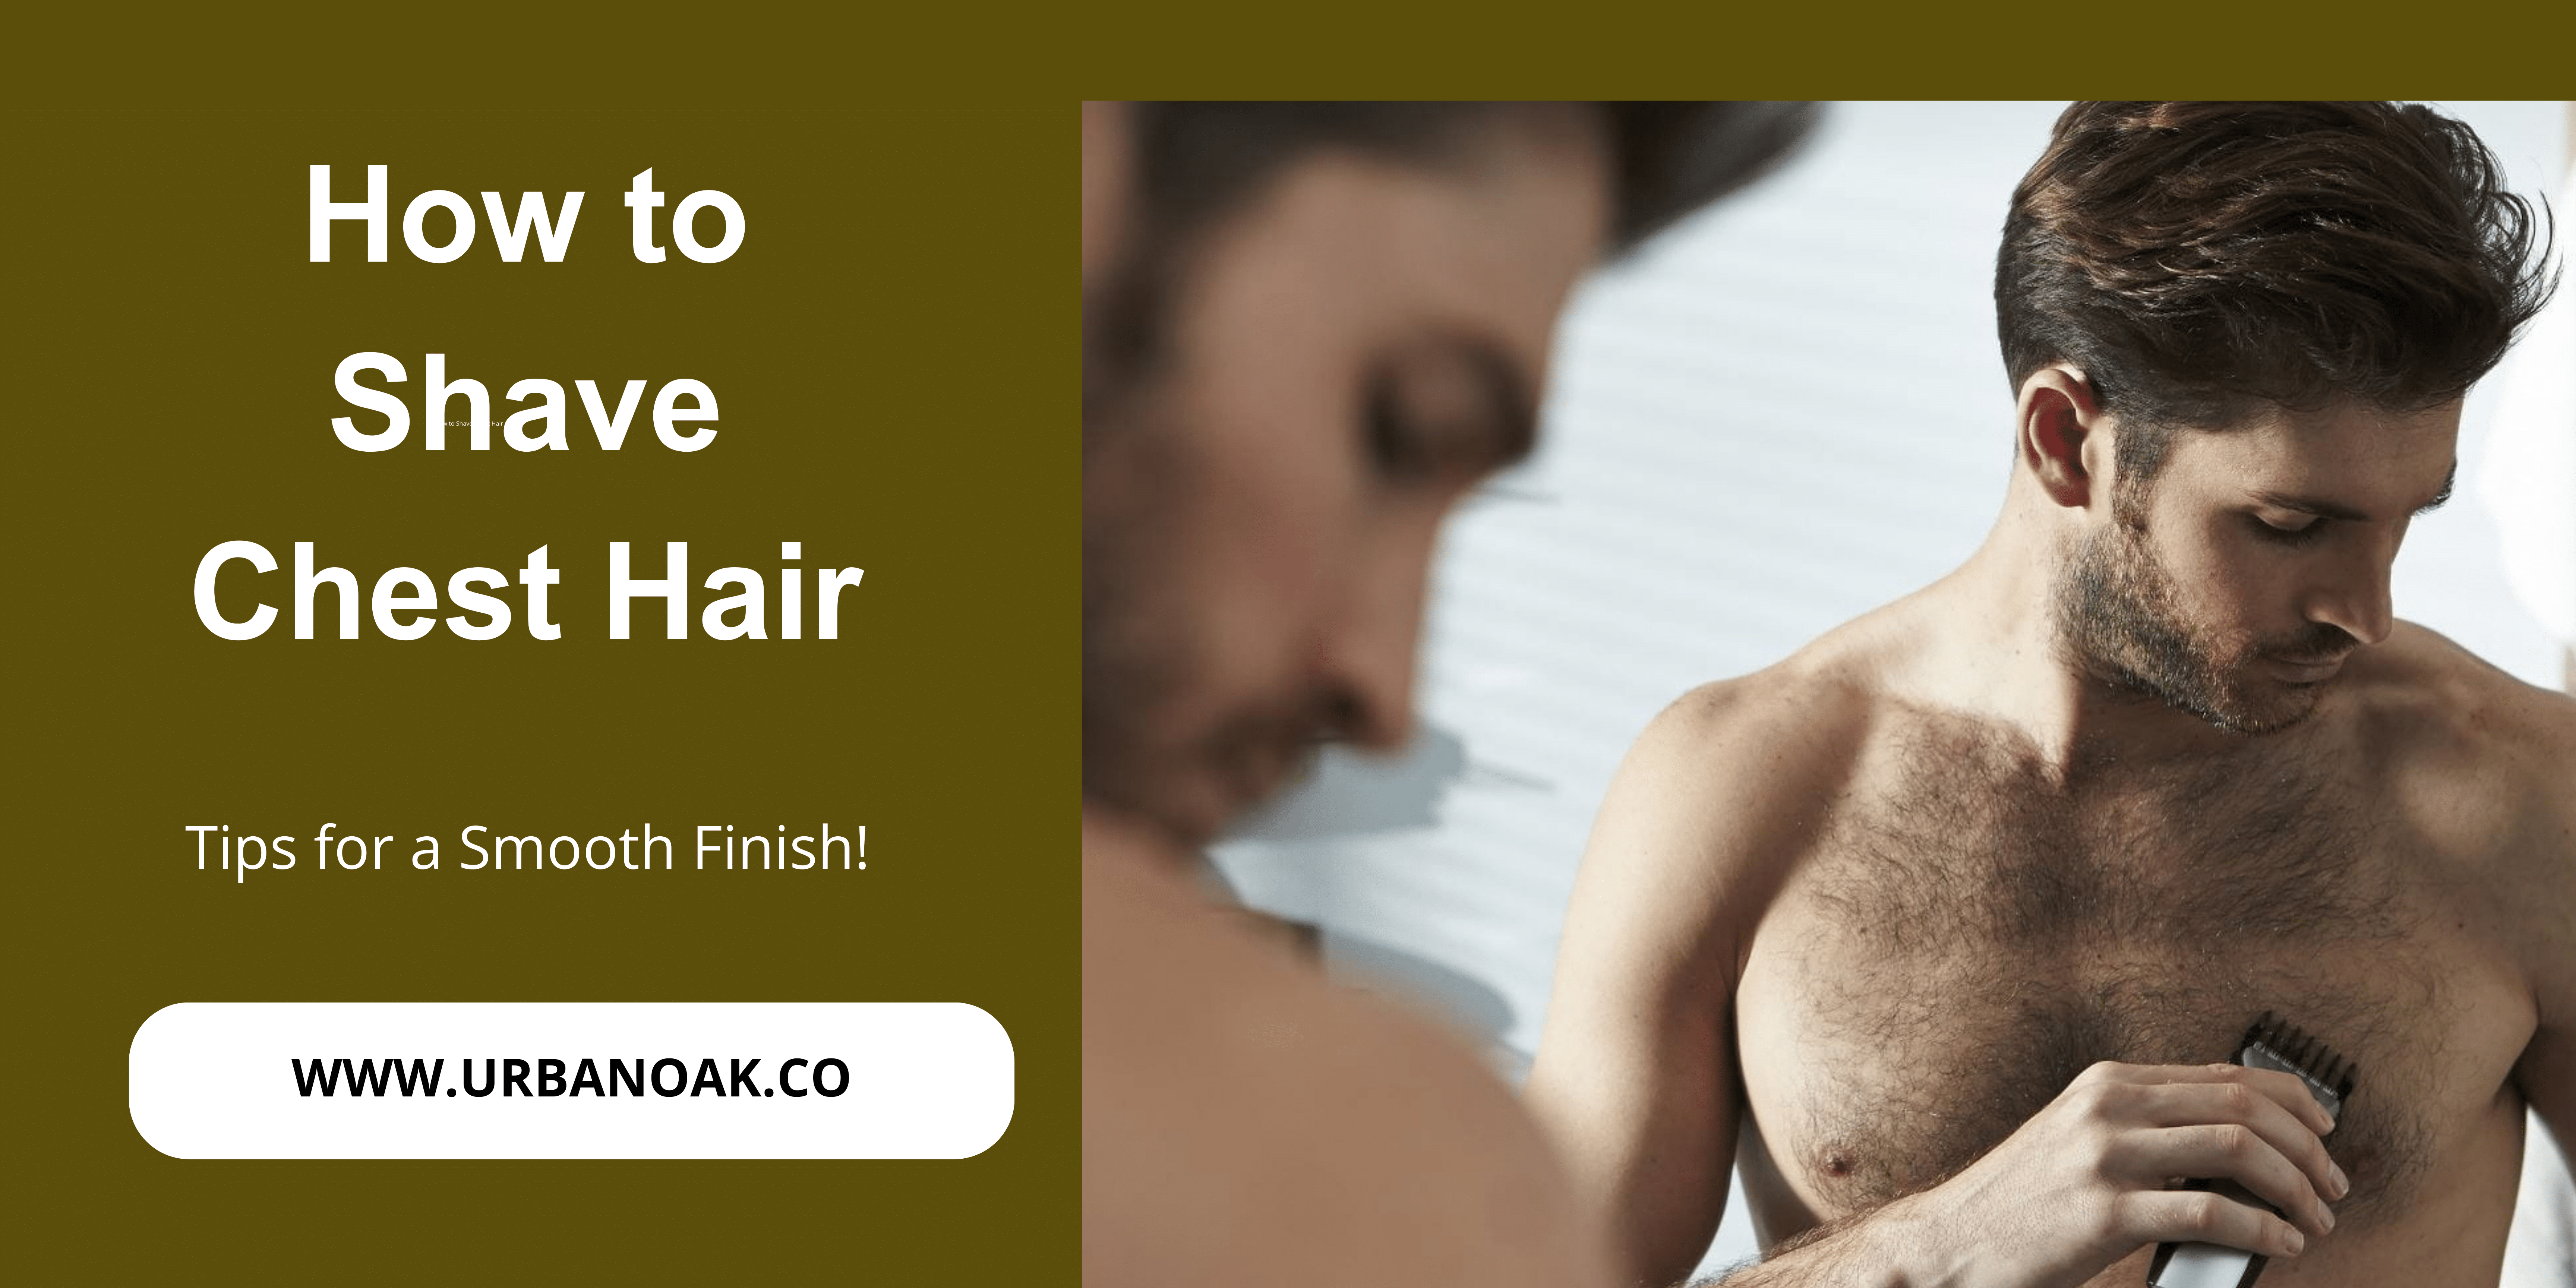 How To Shave Chest Hair